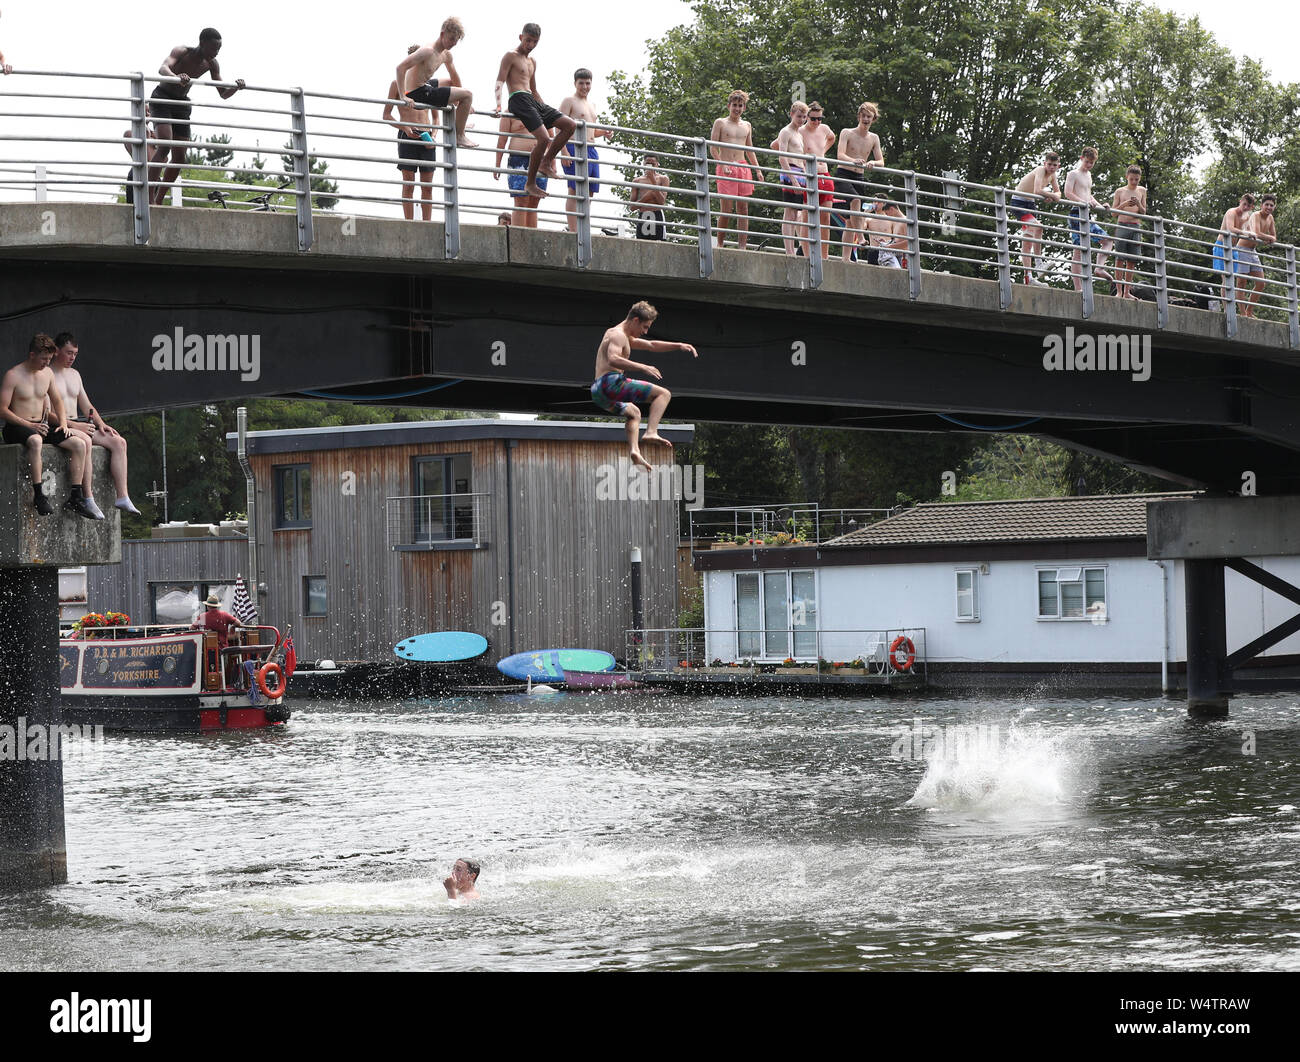 People leap from a bridge at Taggs Island, near Hampton Court, Surrey, as the UK has surpassed the hottest July day on record, with 36.9 degrees celsius being recorded at Heathrow. The all-time UK record of 38.5C (101.3F) recorded in Faversham, Kent, in August 2003, could be broken on Thursday, the Met Office said. Stock Photo